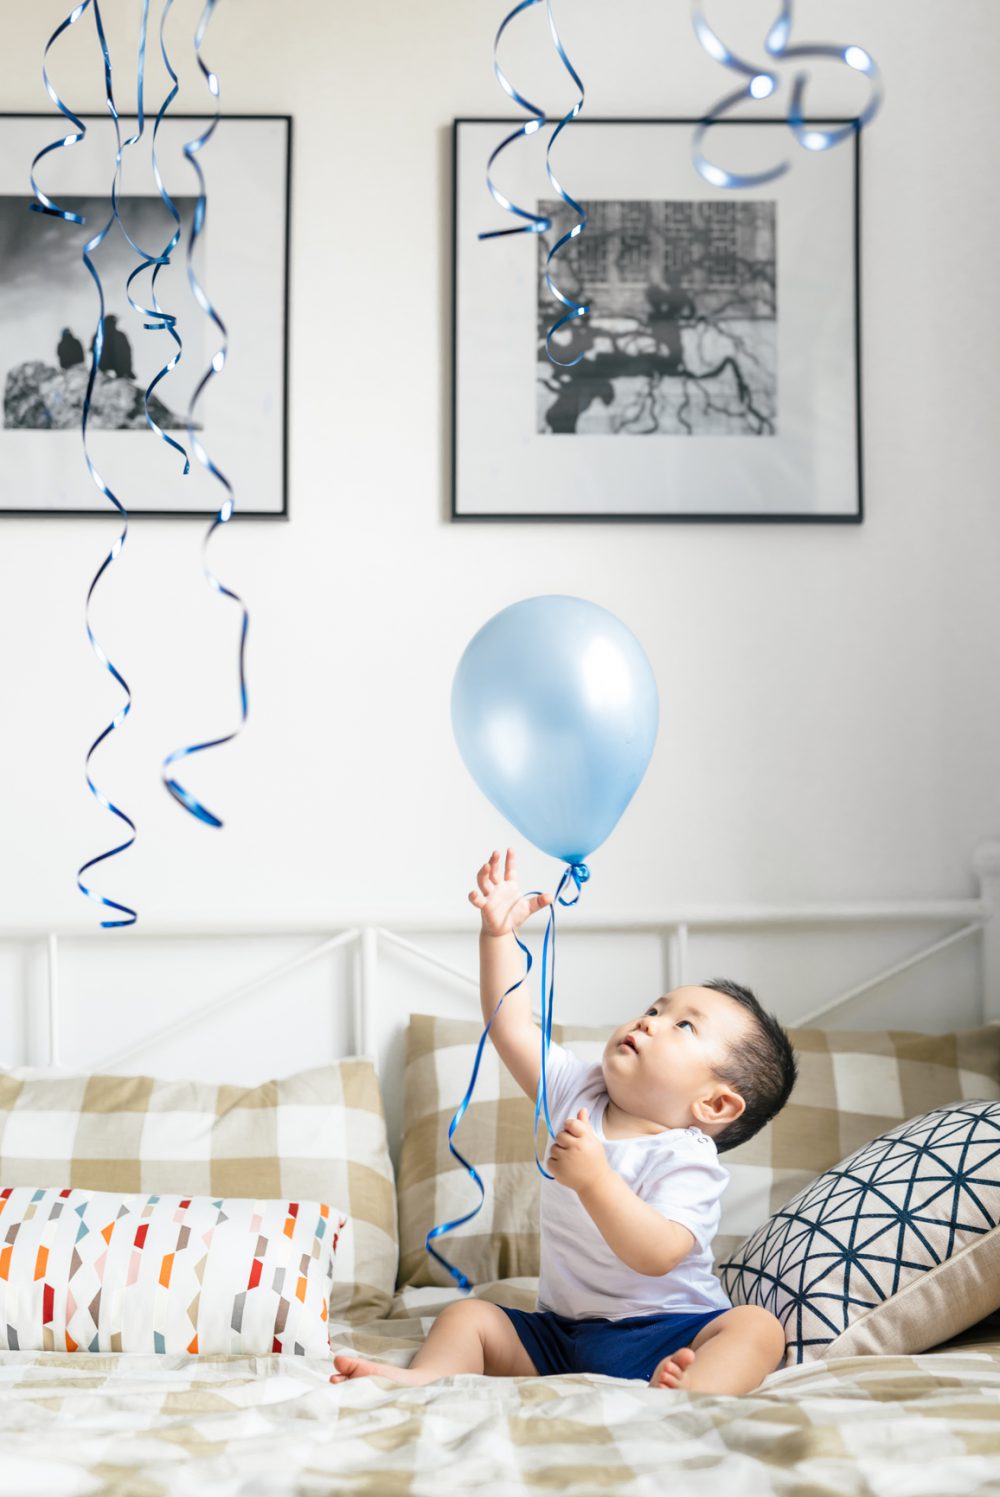 Toddler with birthday balloon